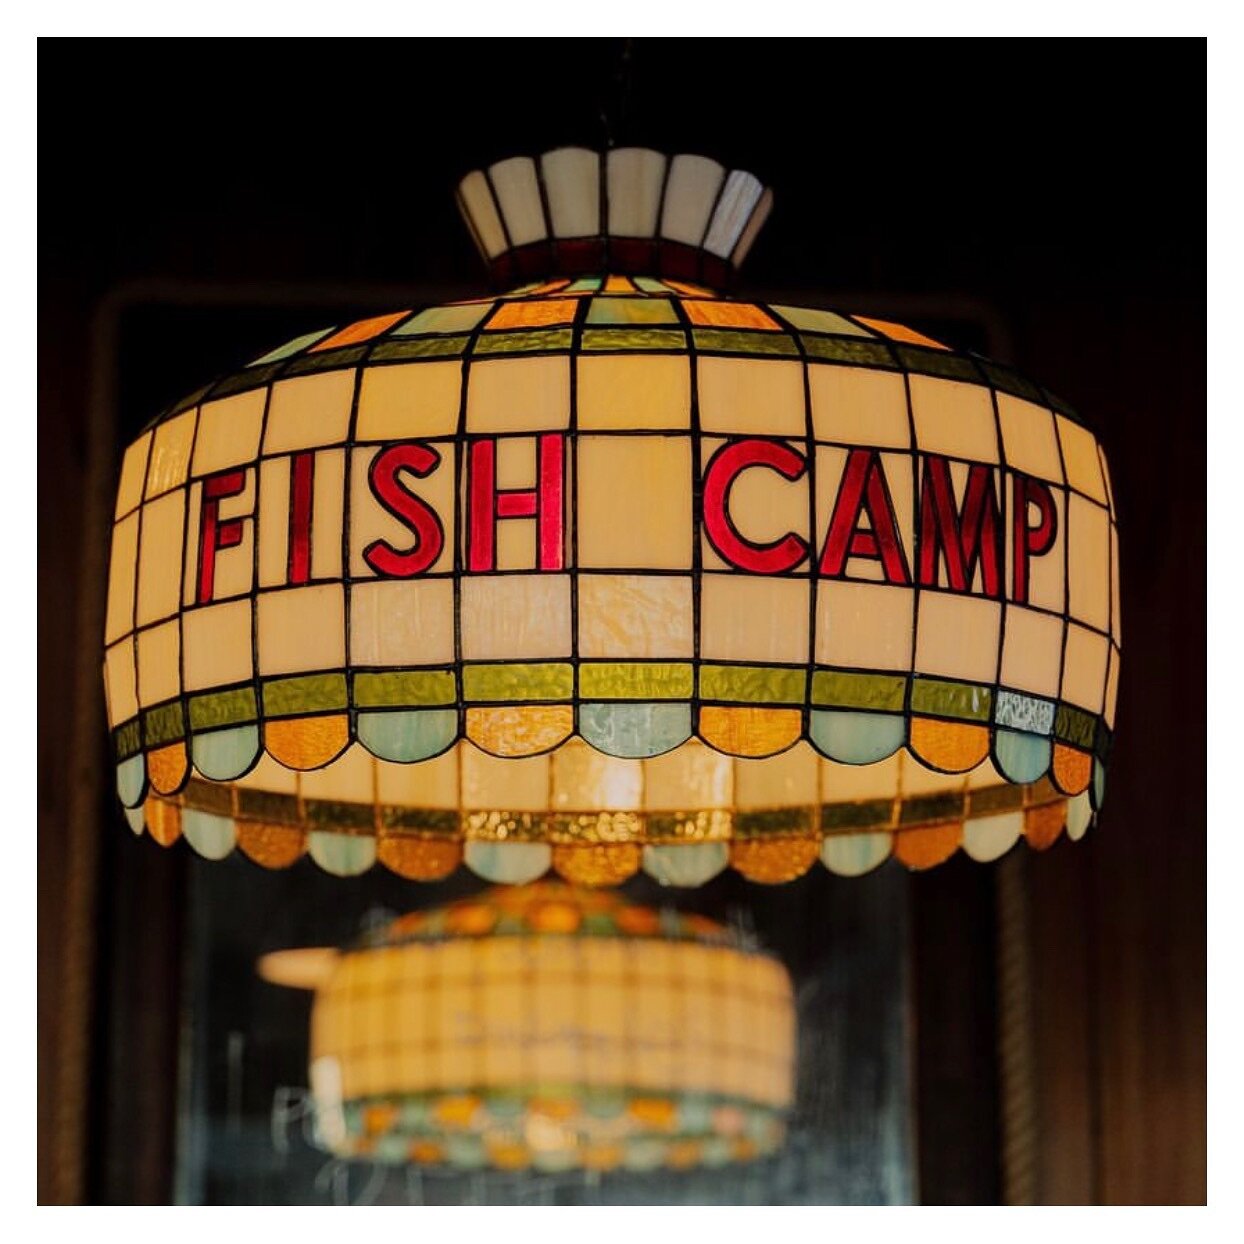 Still one of my favorite lights we&rsquo;ve ever made. 

Stained Glass shade made locally last year to glow over the bar at @sullivansfishcamp 🌊 ✨